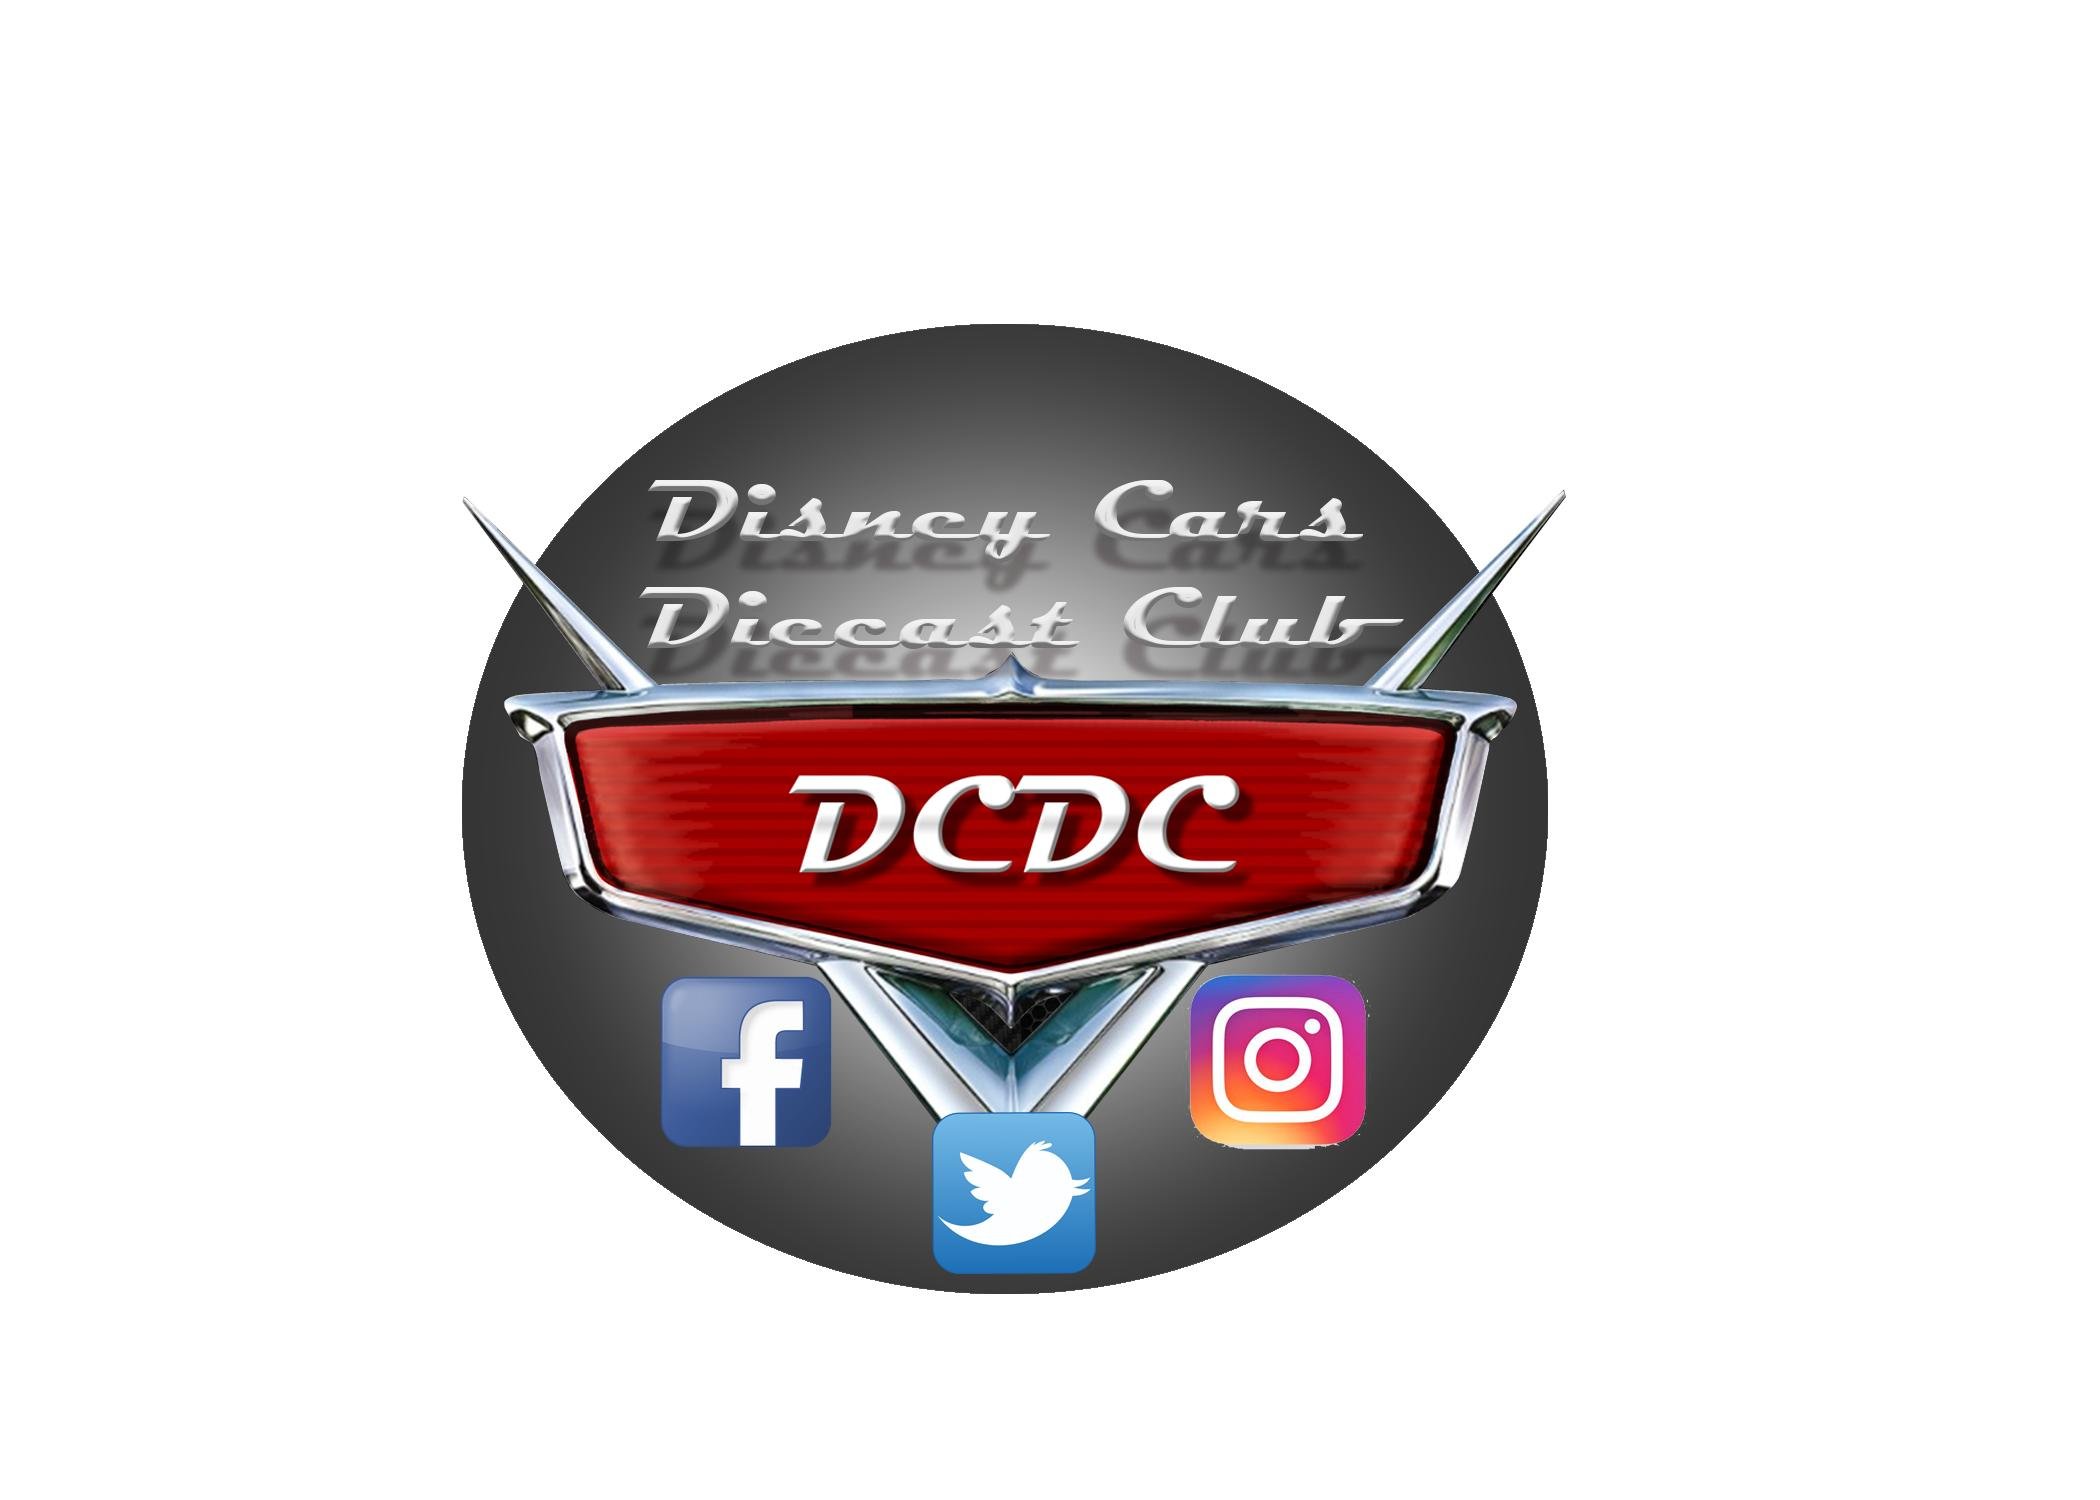 Administrator of Disney Cars Diecast Club. A large social media following dedicated to Disney Cars diecast collecting.